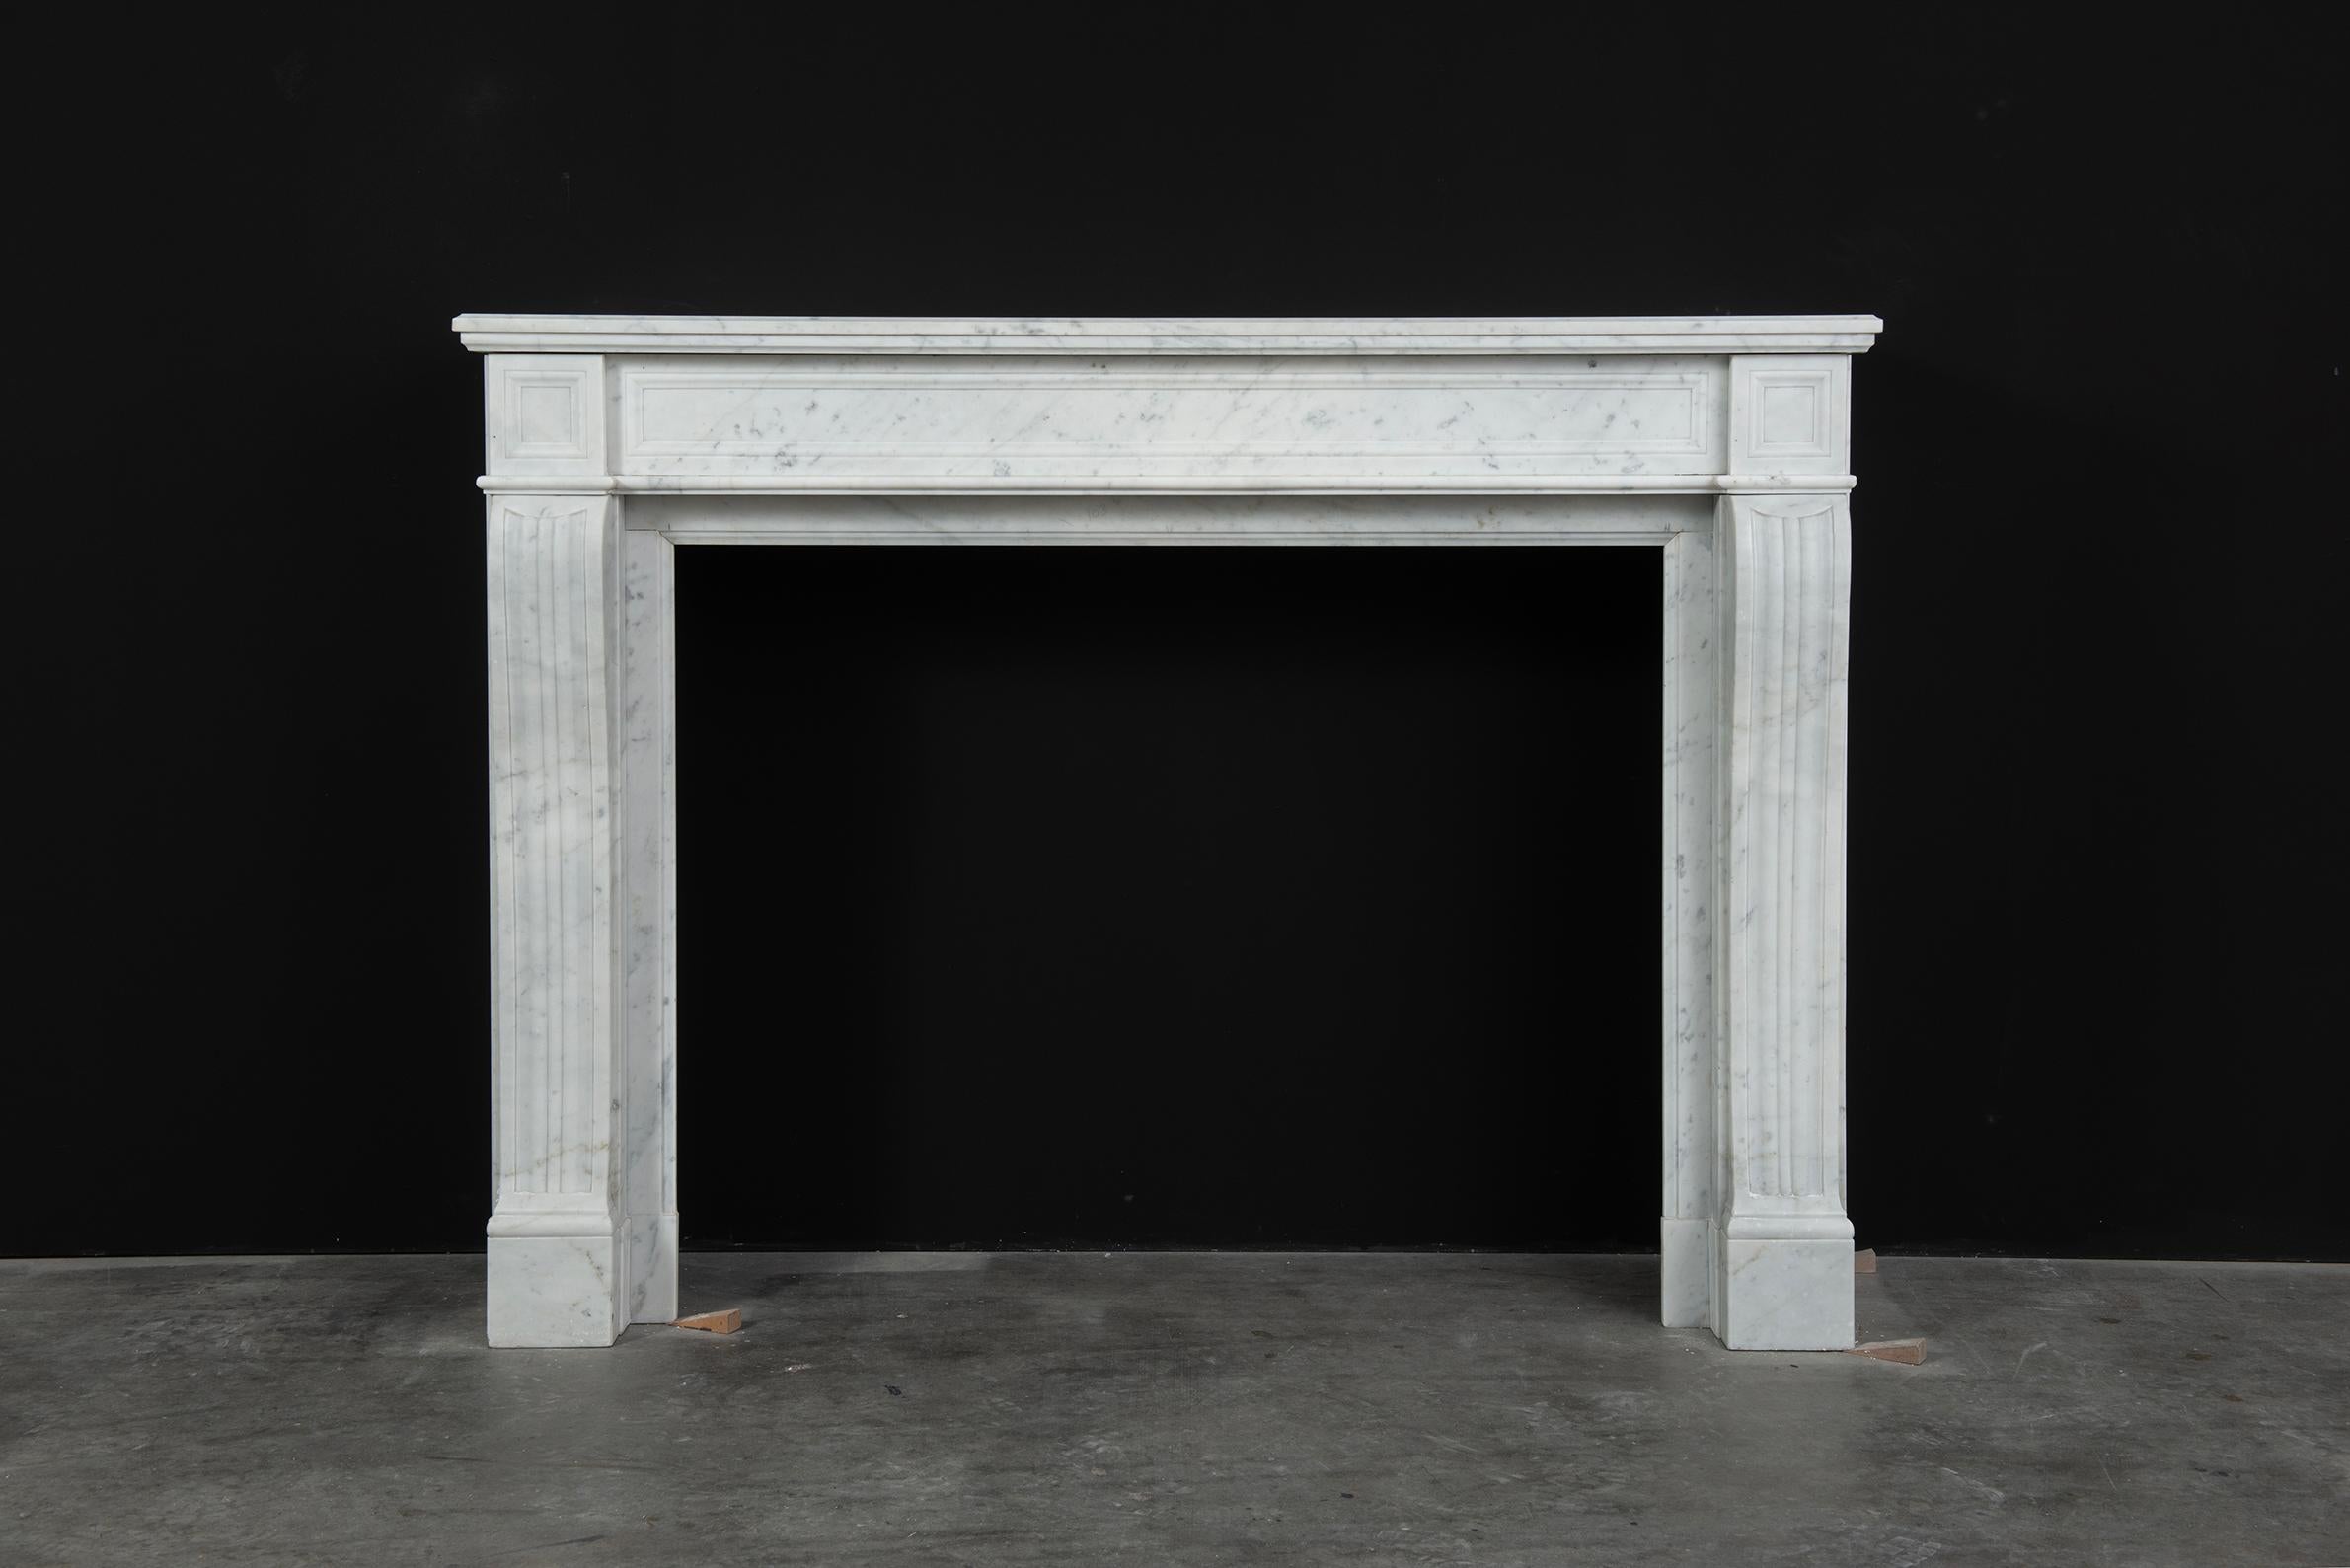 Antique White Marble Louis XVI Fireplace Mantel.

Lovely simple and elegant white marble Louis XVI fireplace mantel.
The rectangular and profiled top shelf rest on a simple paneled straight frieze with endblocks on both sides that have the same